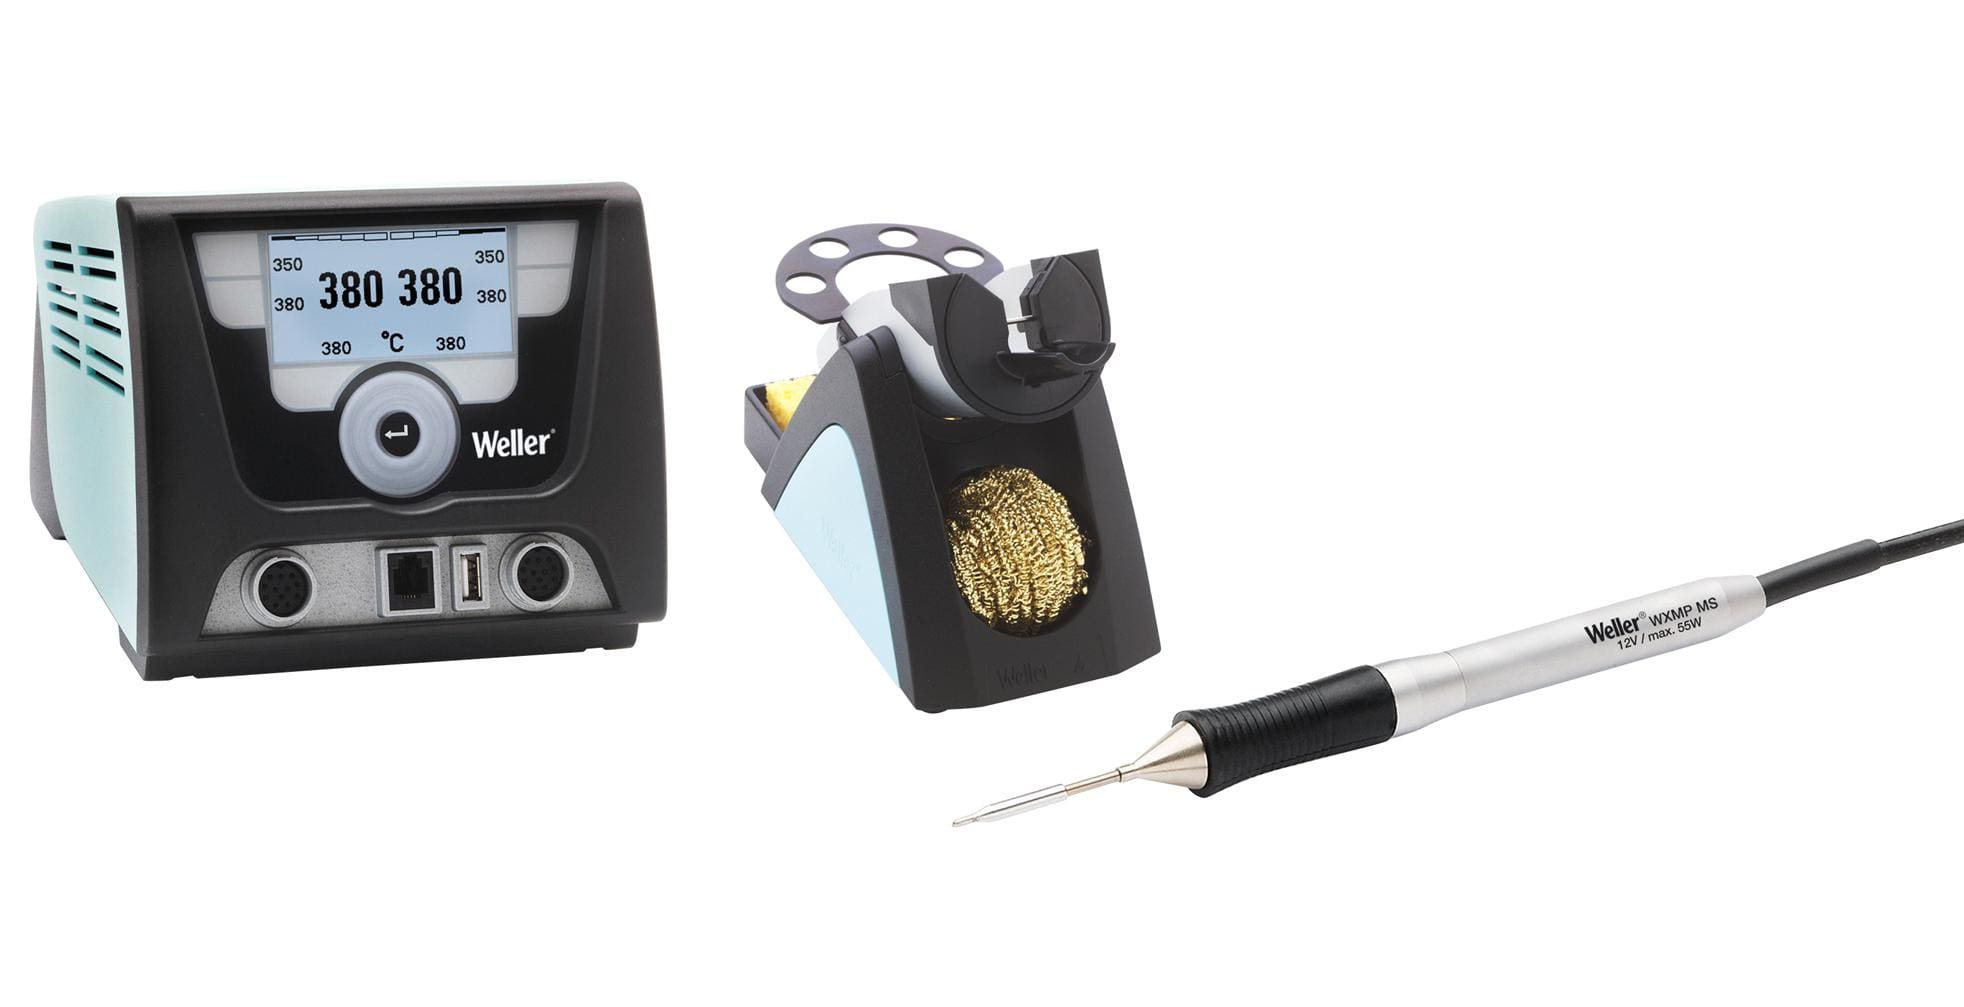 WELLER Soldering Stations WX 2010 MICRO PROMO MICRO SOLDERING STATION SET, 230V, 255W WELLER 3501718 WX 2010 MICRO PROMO